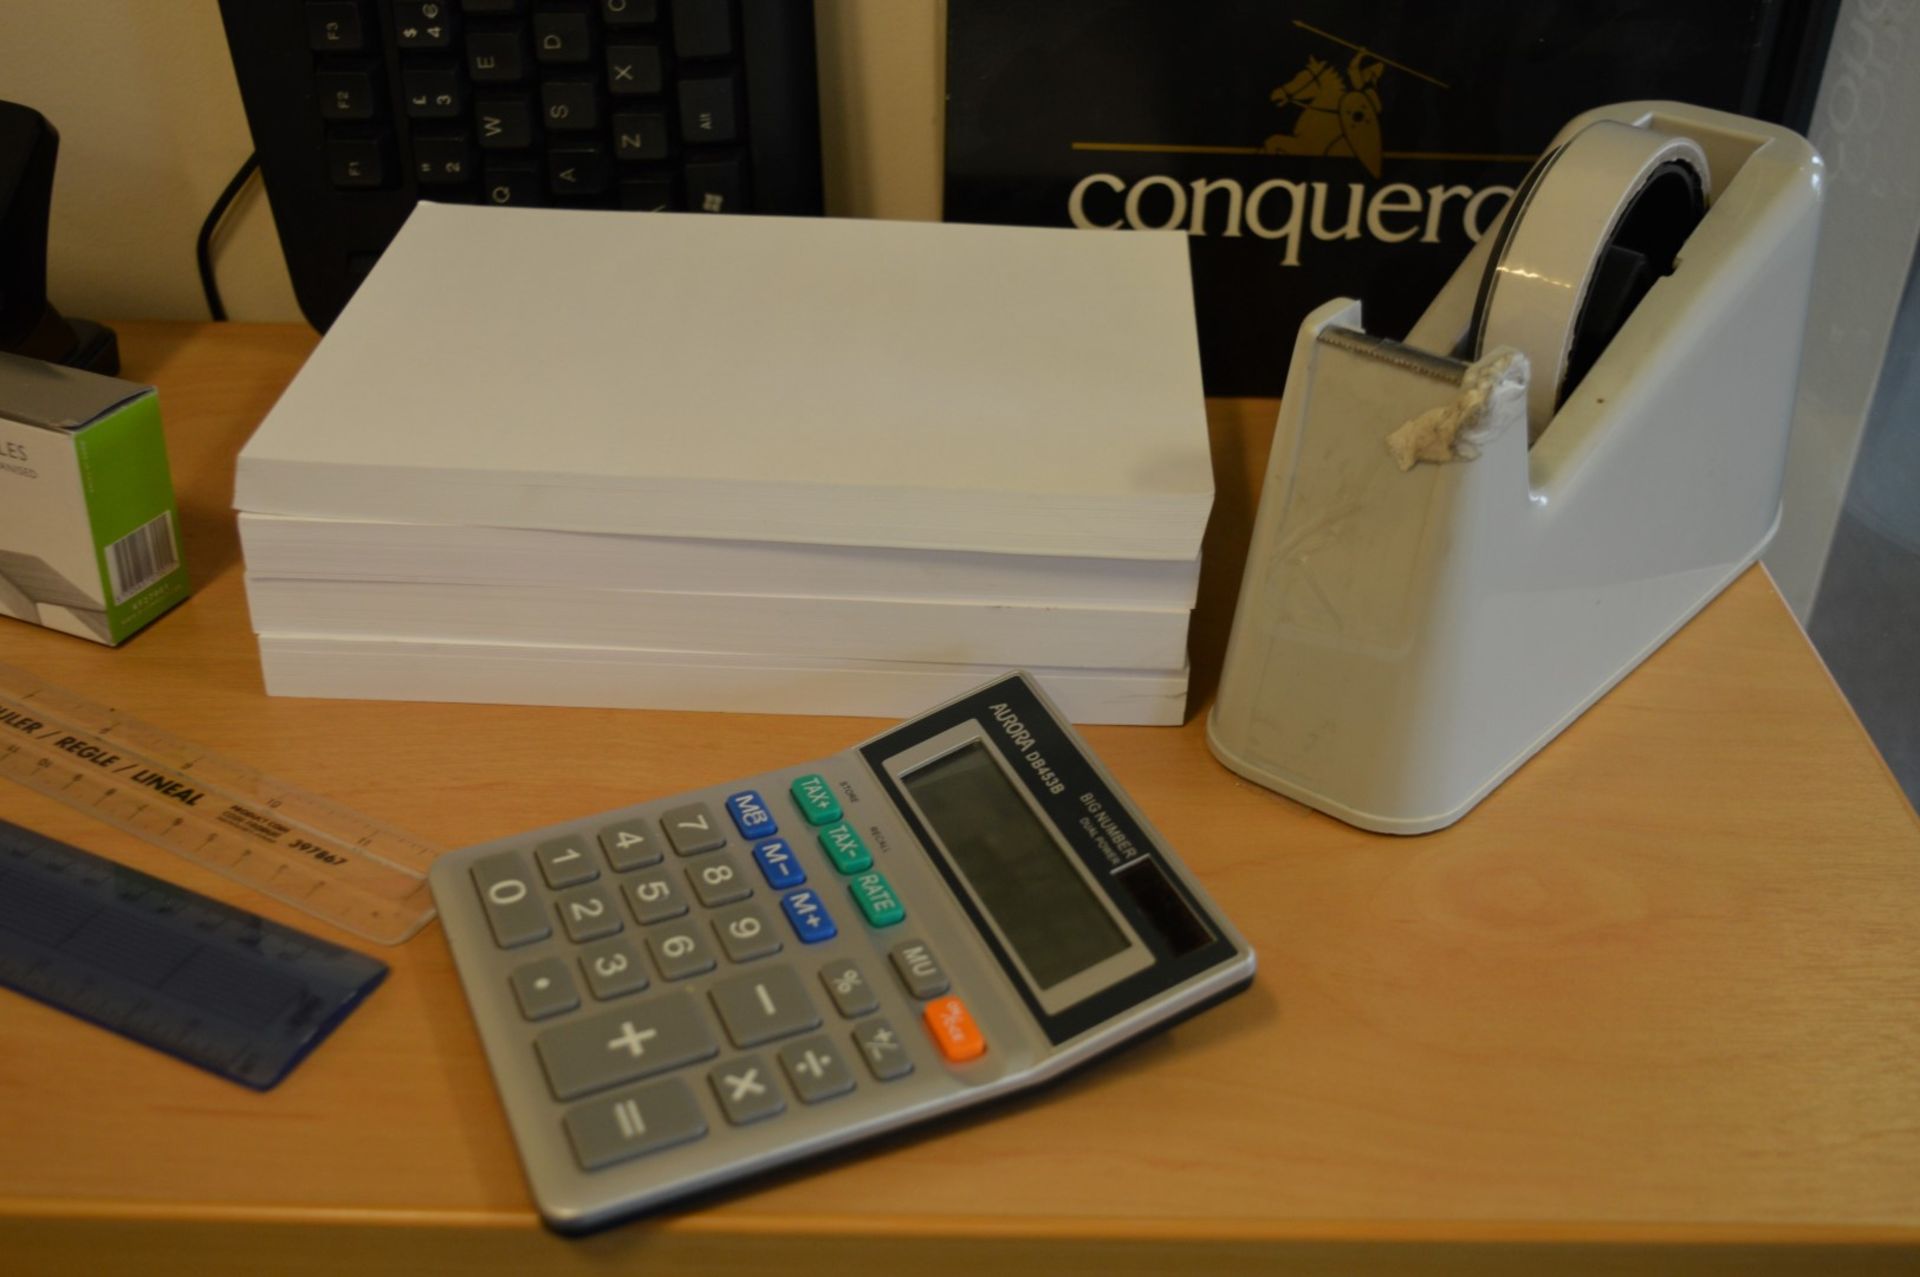 1 x Assorted Collection of Stationary - Includes Keyboard, Writing Pads, Calculator, Staplers, - Image 3 of 6